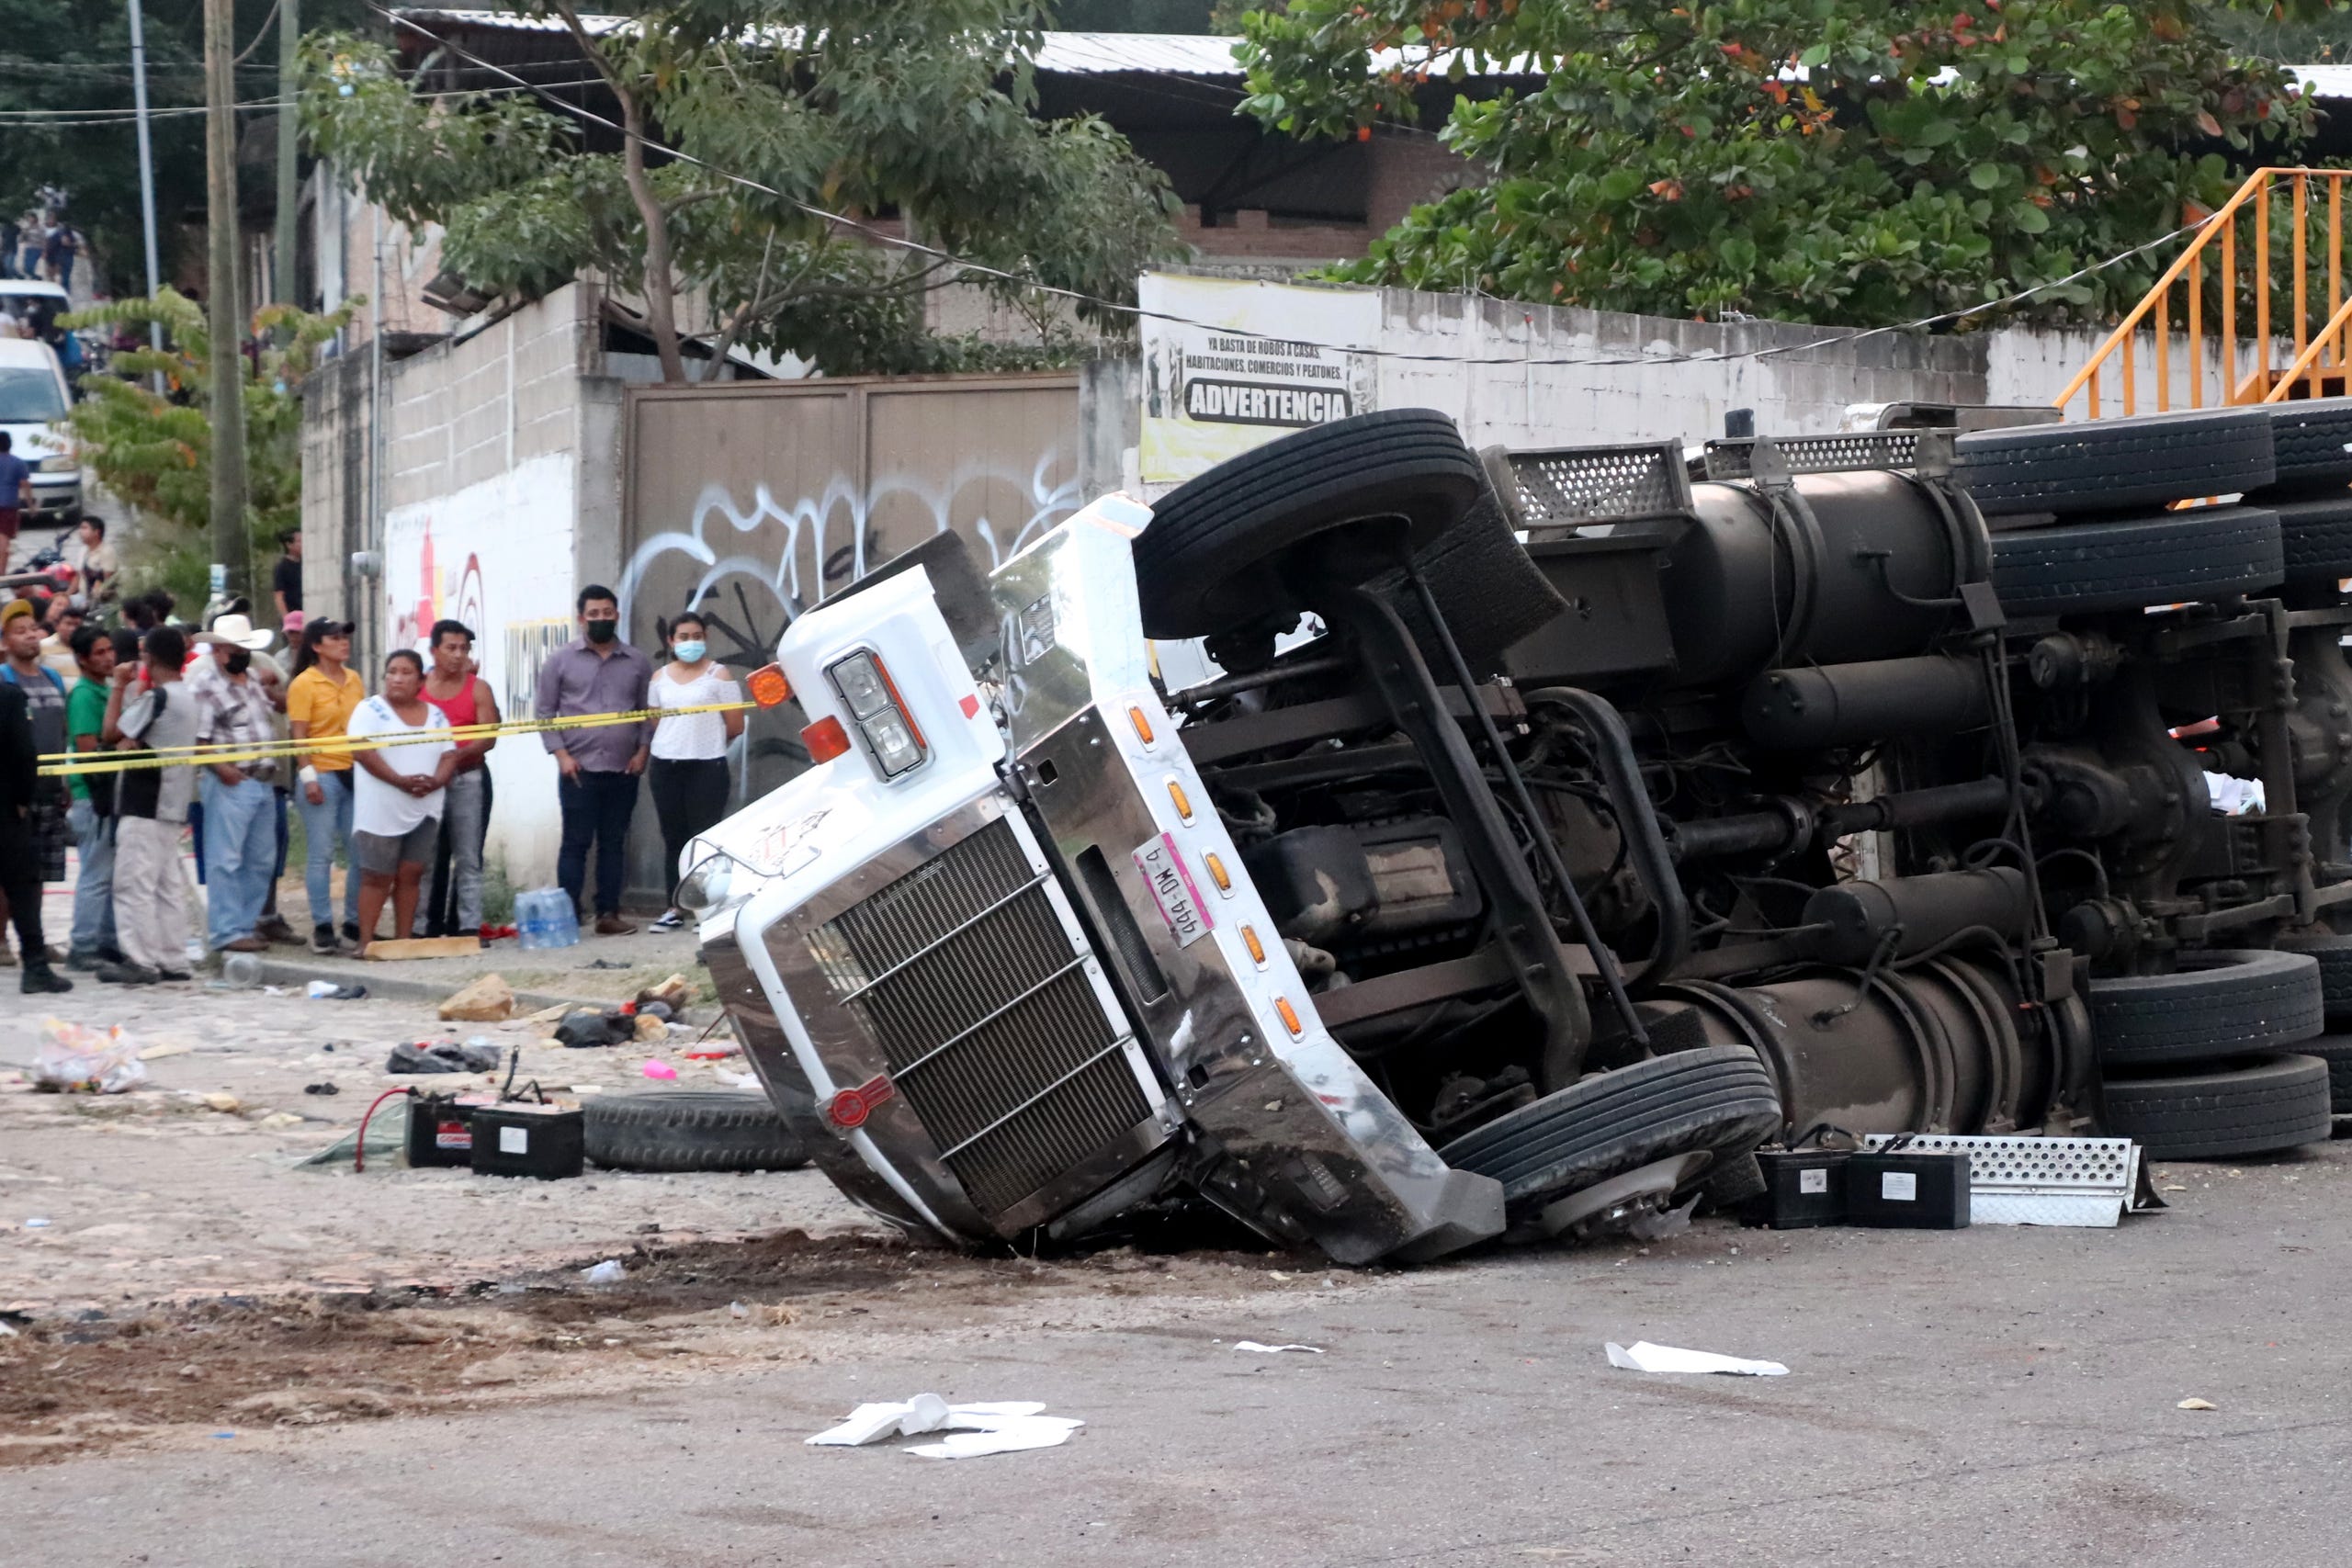 People observe a truck that rolled over after a traffic accident that was transporting migrants from Central America on December 9, 2021 in Tuxtla Gutierrez, Mexico.